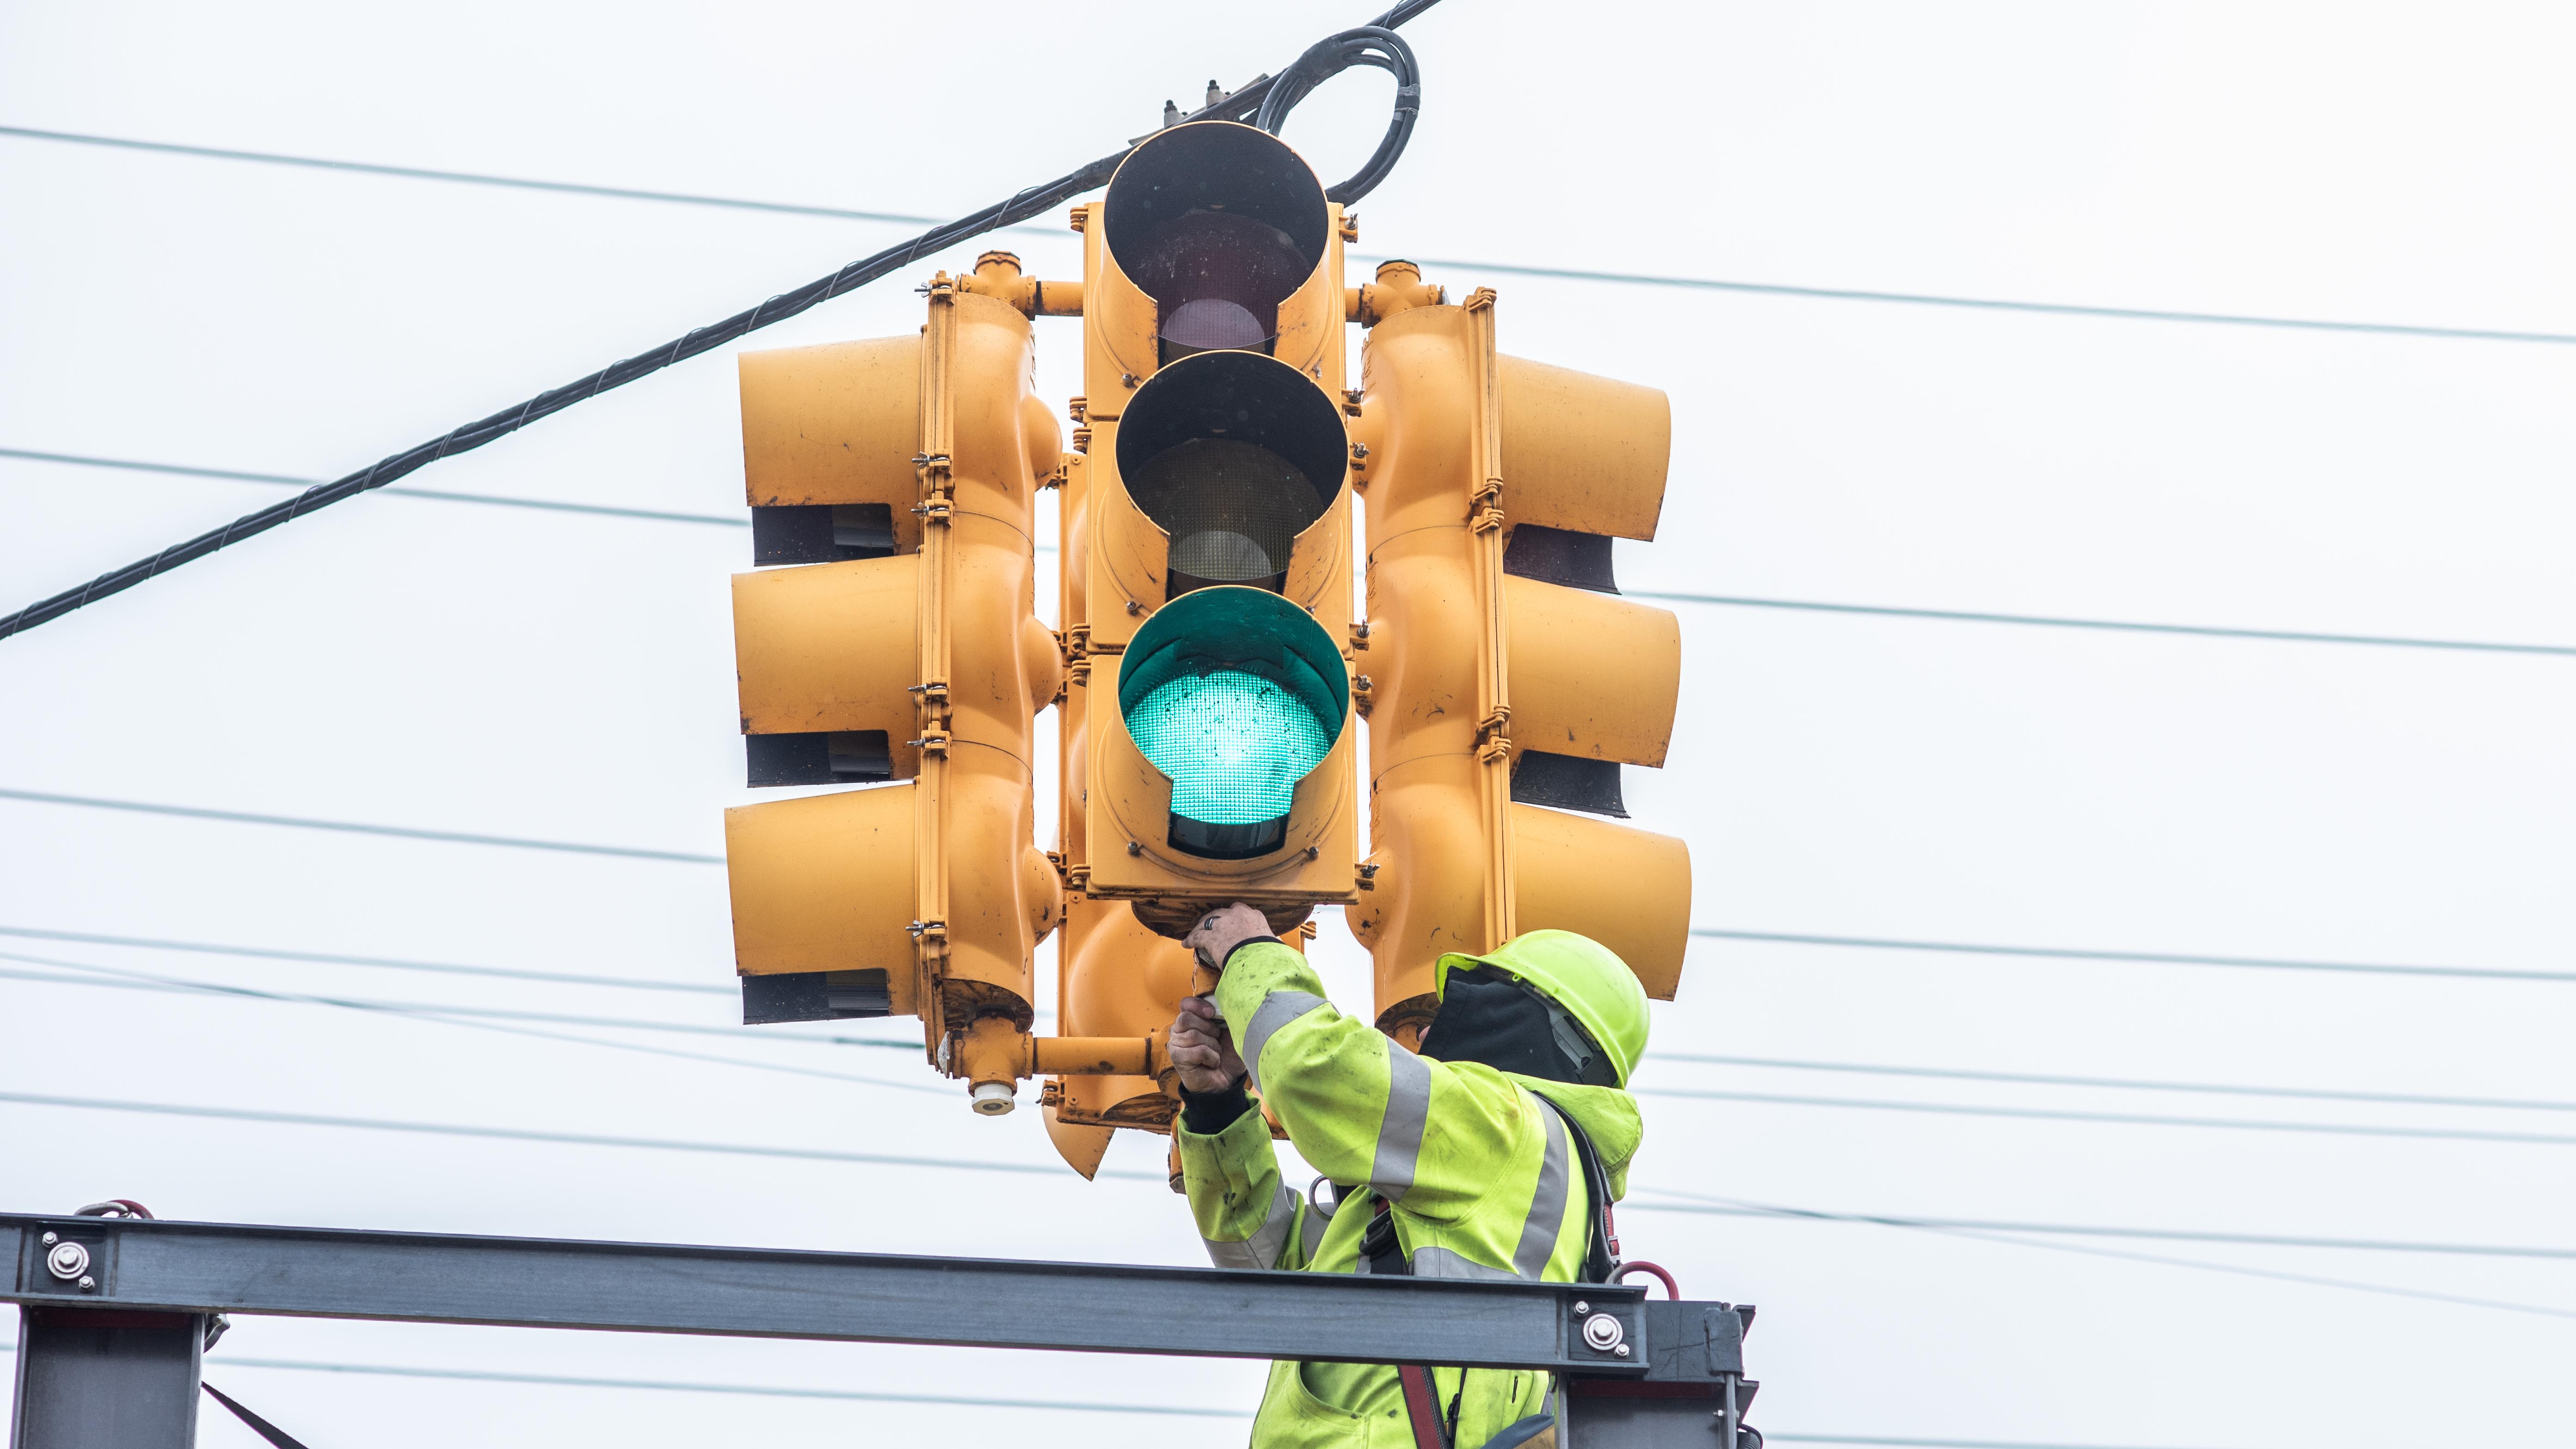 Macomb County Department of Roads personnel install traffic signal heating technology